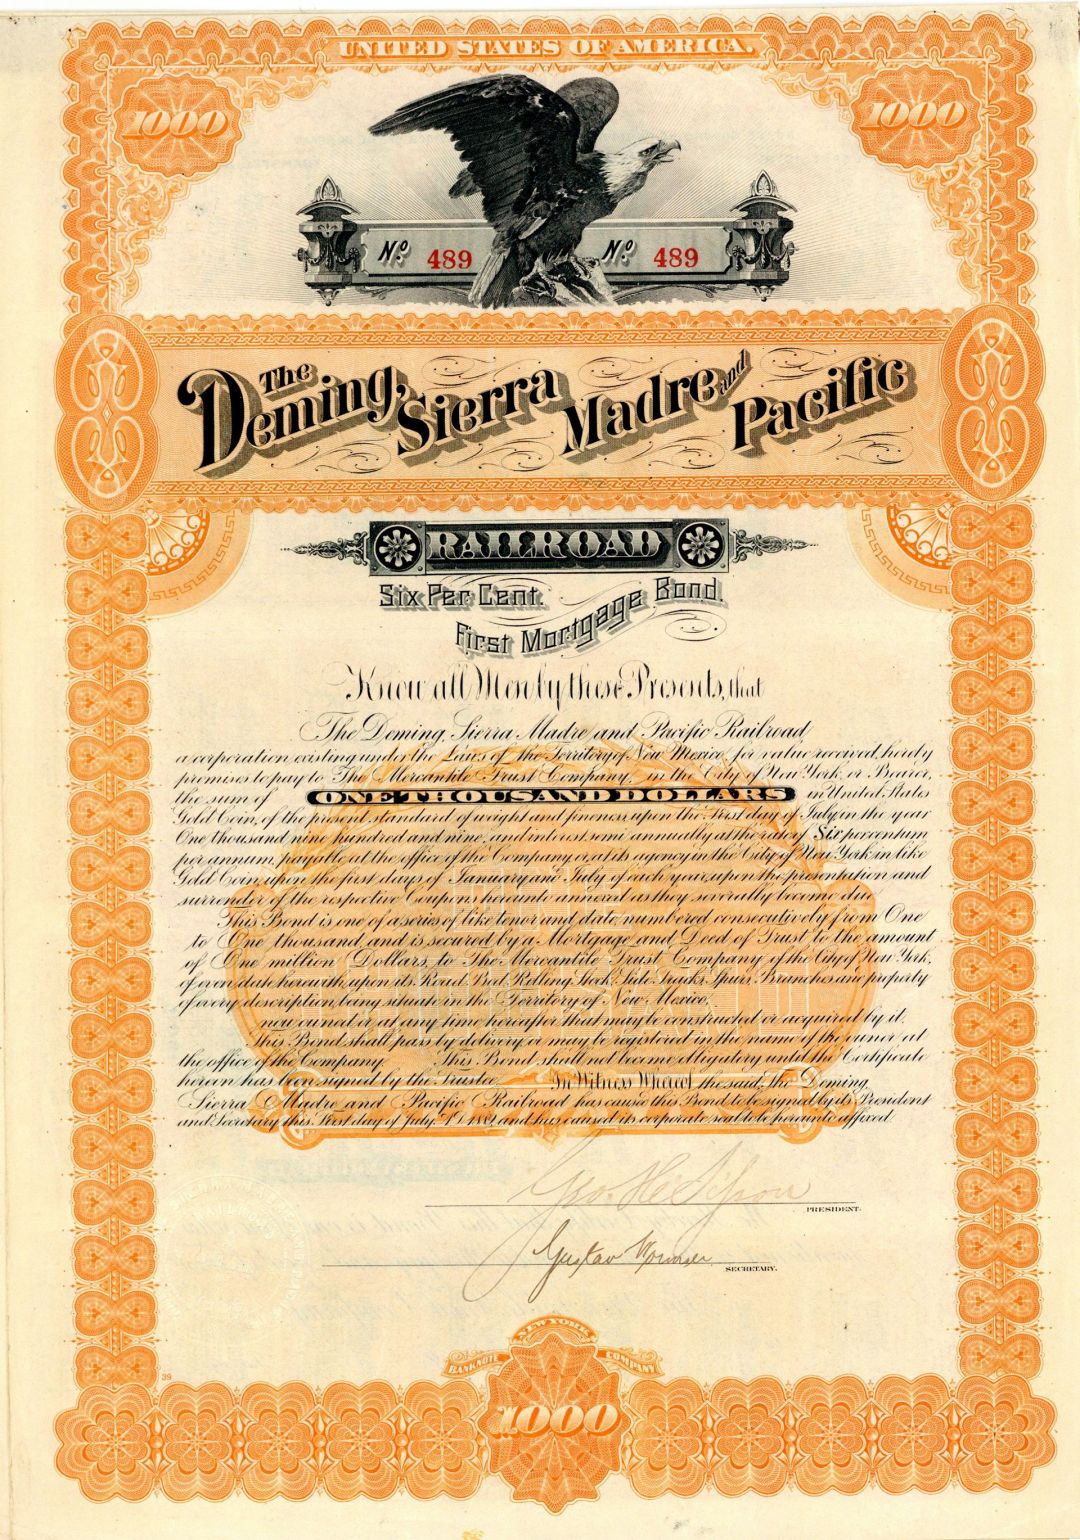 1889 dated Deming, Sierra Madre and Pacific Railroad Gold Bond - $1,000 6% First Mortgage Railway Uncanceled Bond